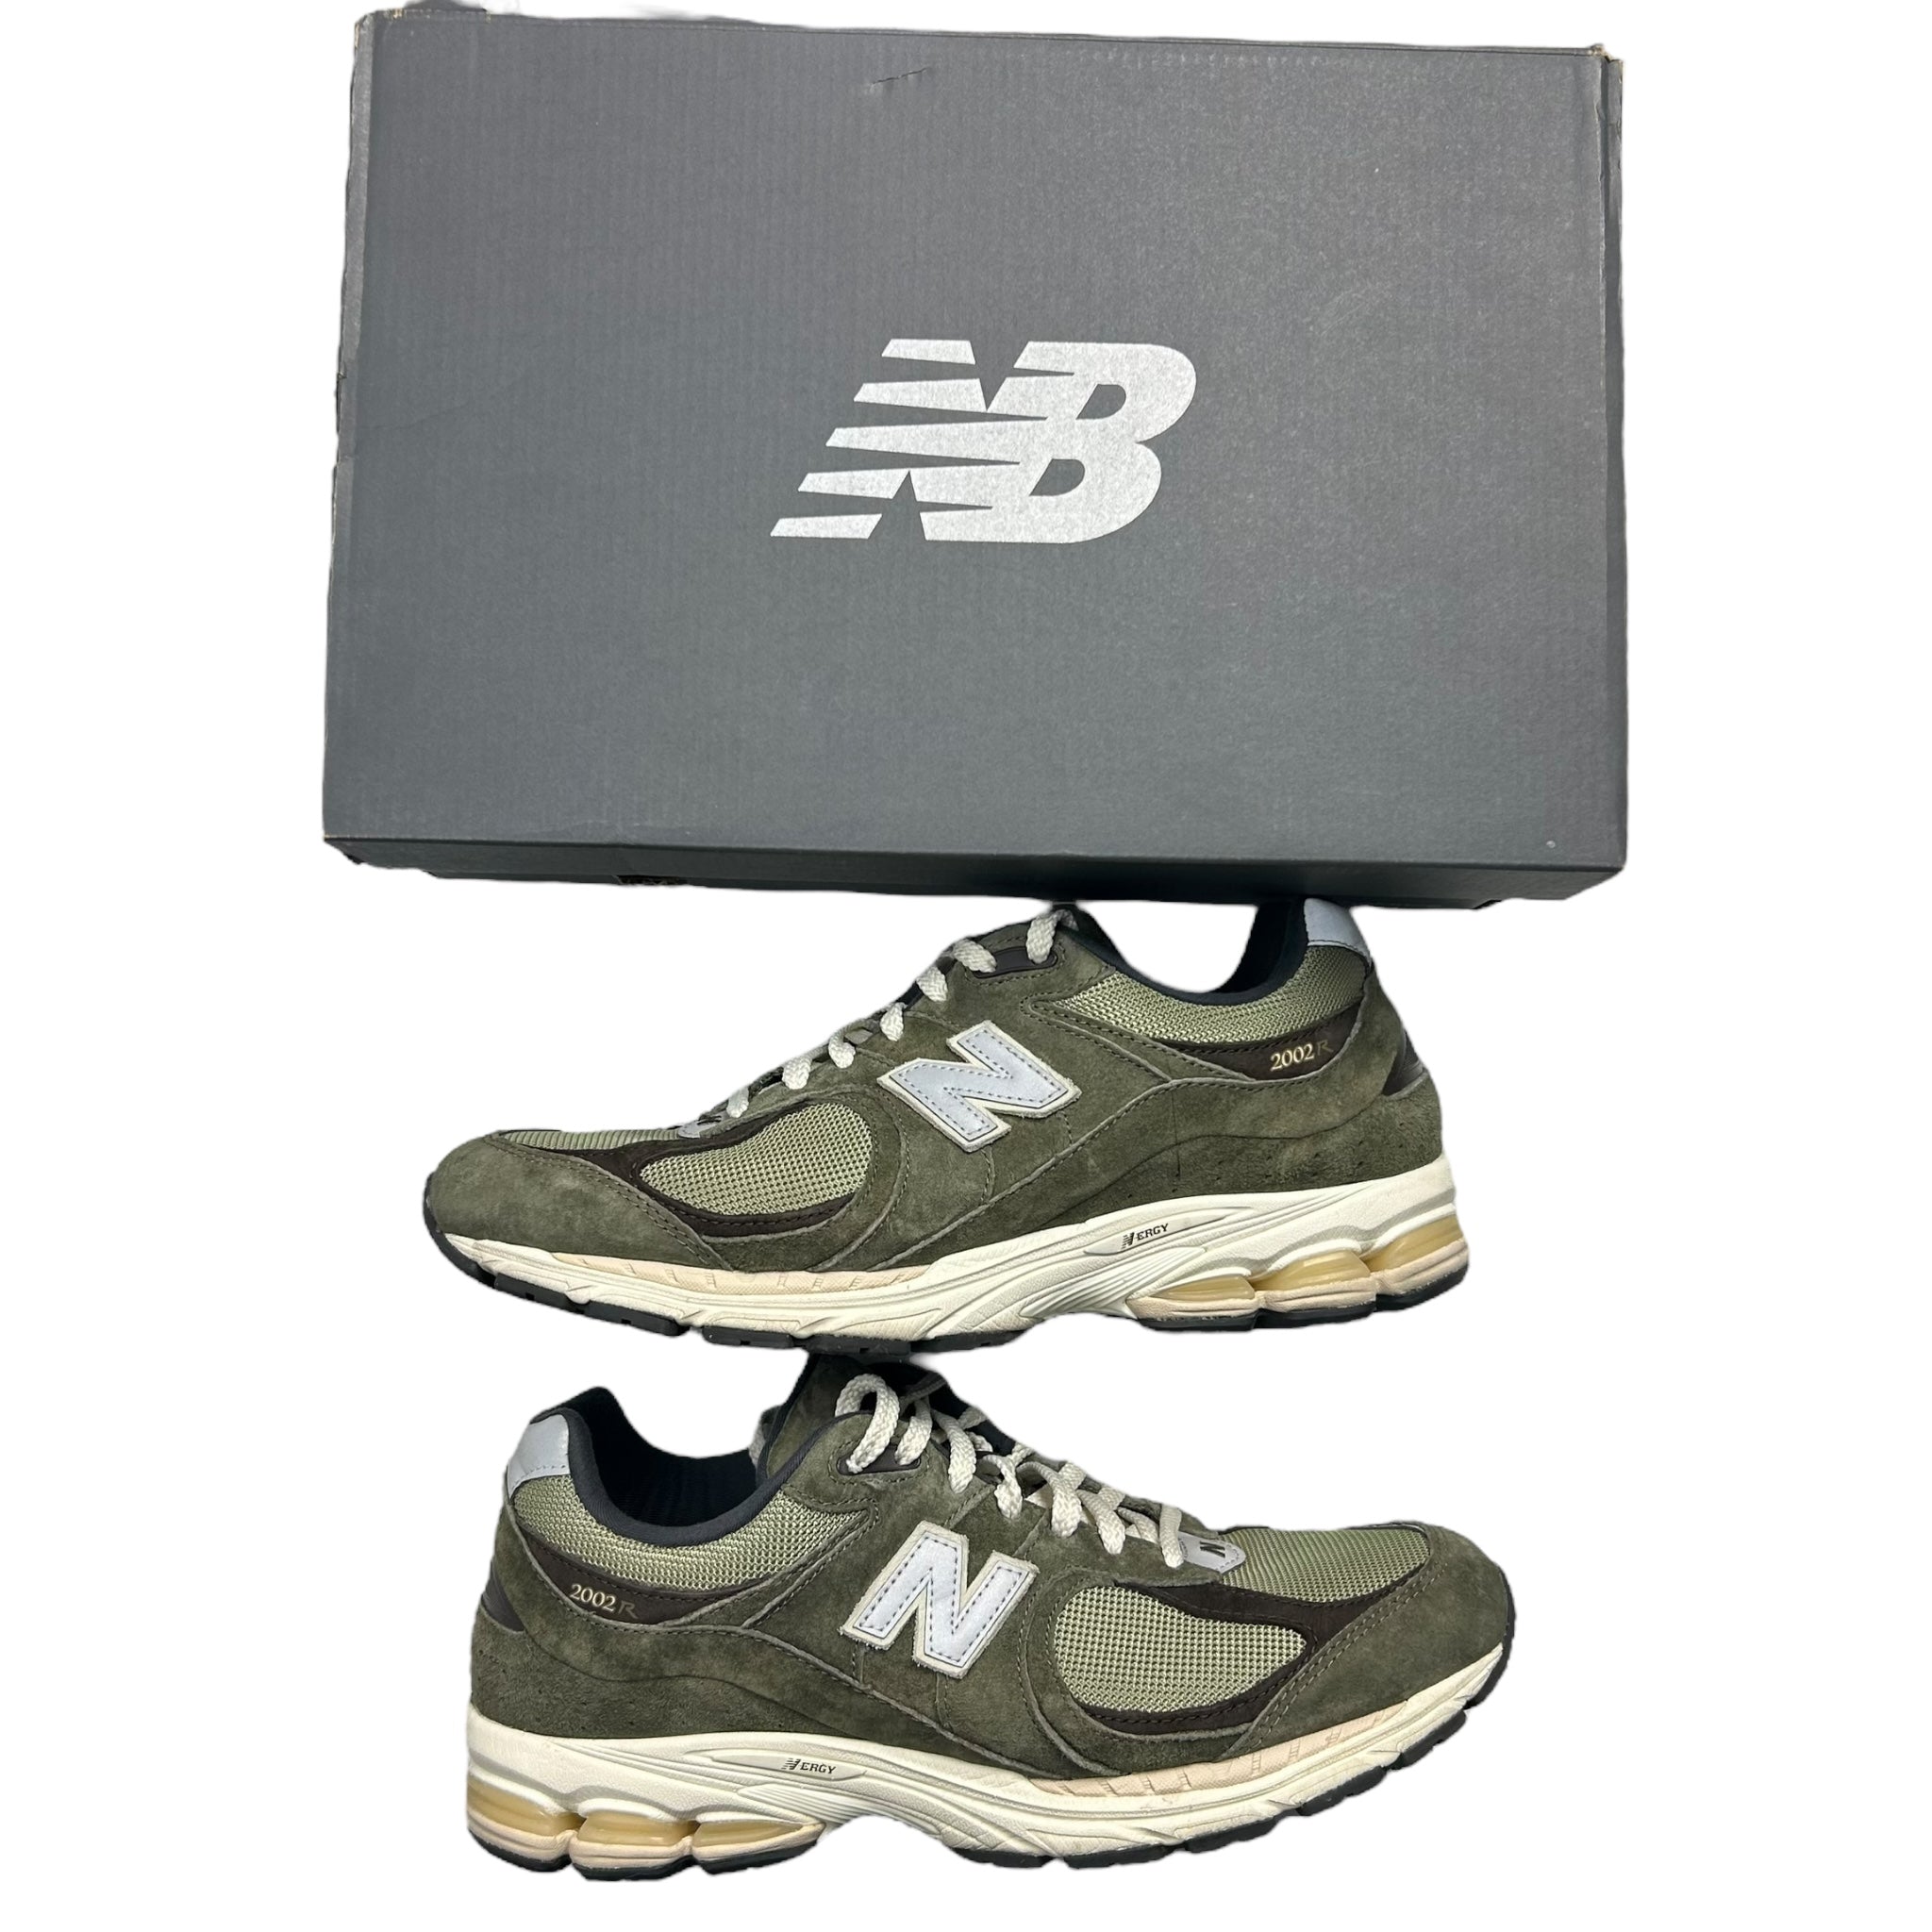 New Balance 2002R Olive Brown (Used)